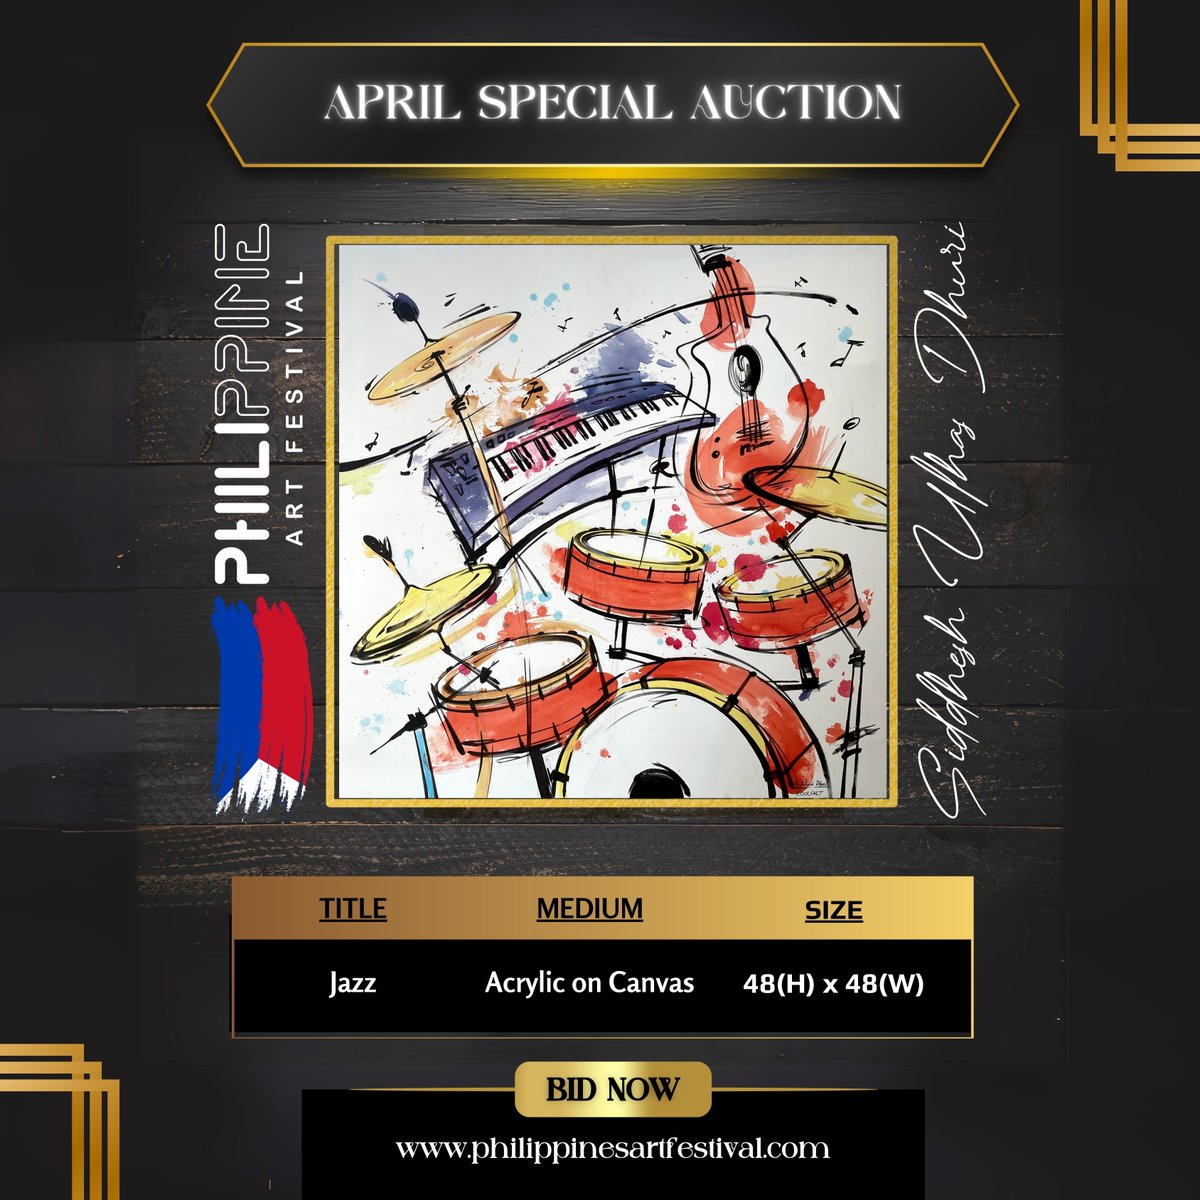 Join us for a celebration of creativity and bid on breathtaking artworks that will make this month of April extra special. Visit our website to bid now!

#PhilippineArtFestival #Artfestival #artevent #artfest #artists #Filipinoart #Filipinoartists #Filipino #ArtinPhilippines